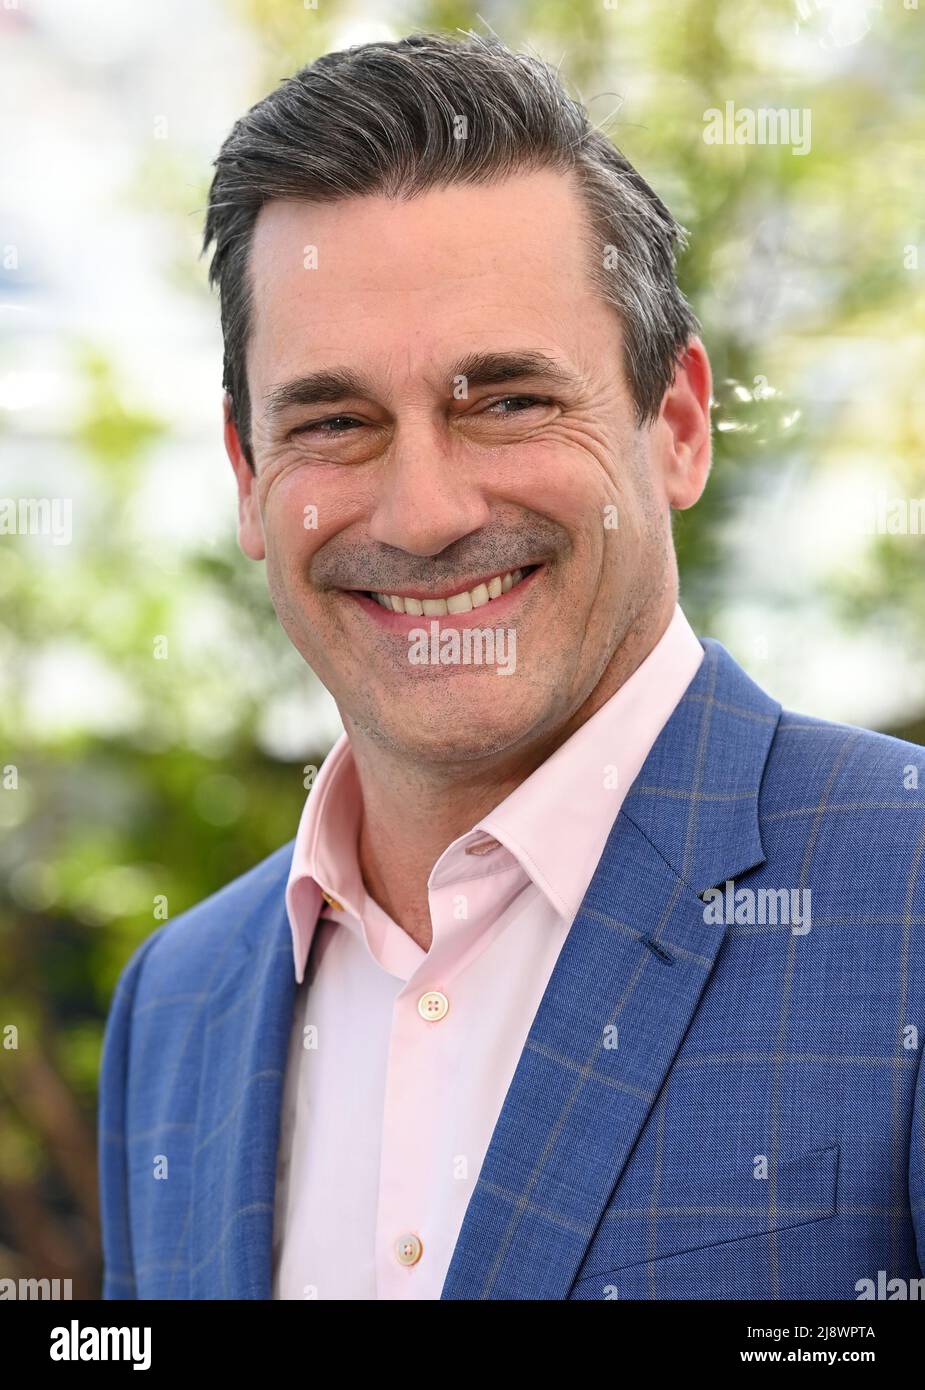 Cannes, France. May 18th, 2022. Cannes, France. Jon Hamm attending the Top Gun Maverick photocall, part of the 75th Cannes Film Festival, Palais de Festival, Cannes. Credit: Doug Peters/EMPICS/Alamy Live News Stock Photo